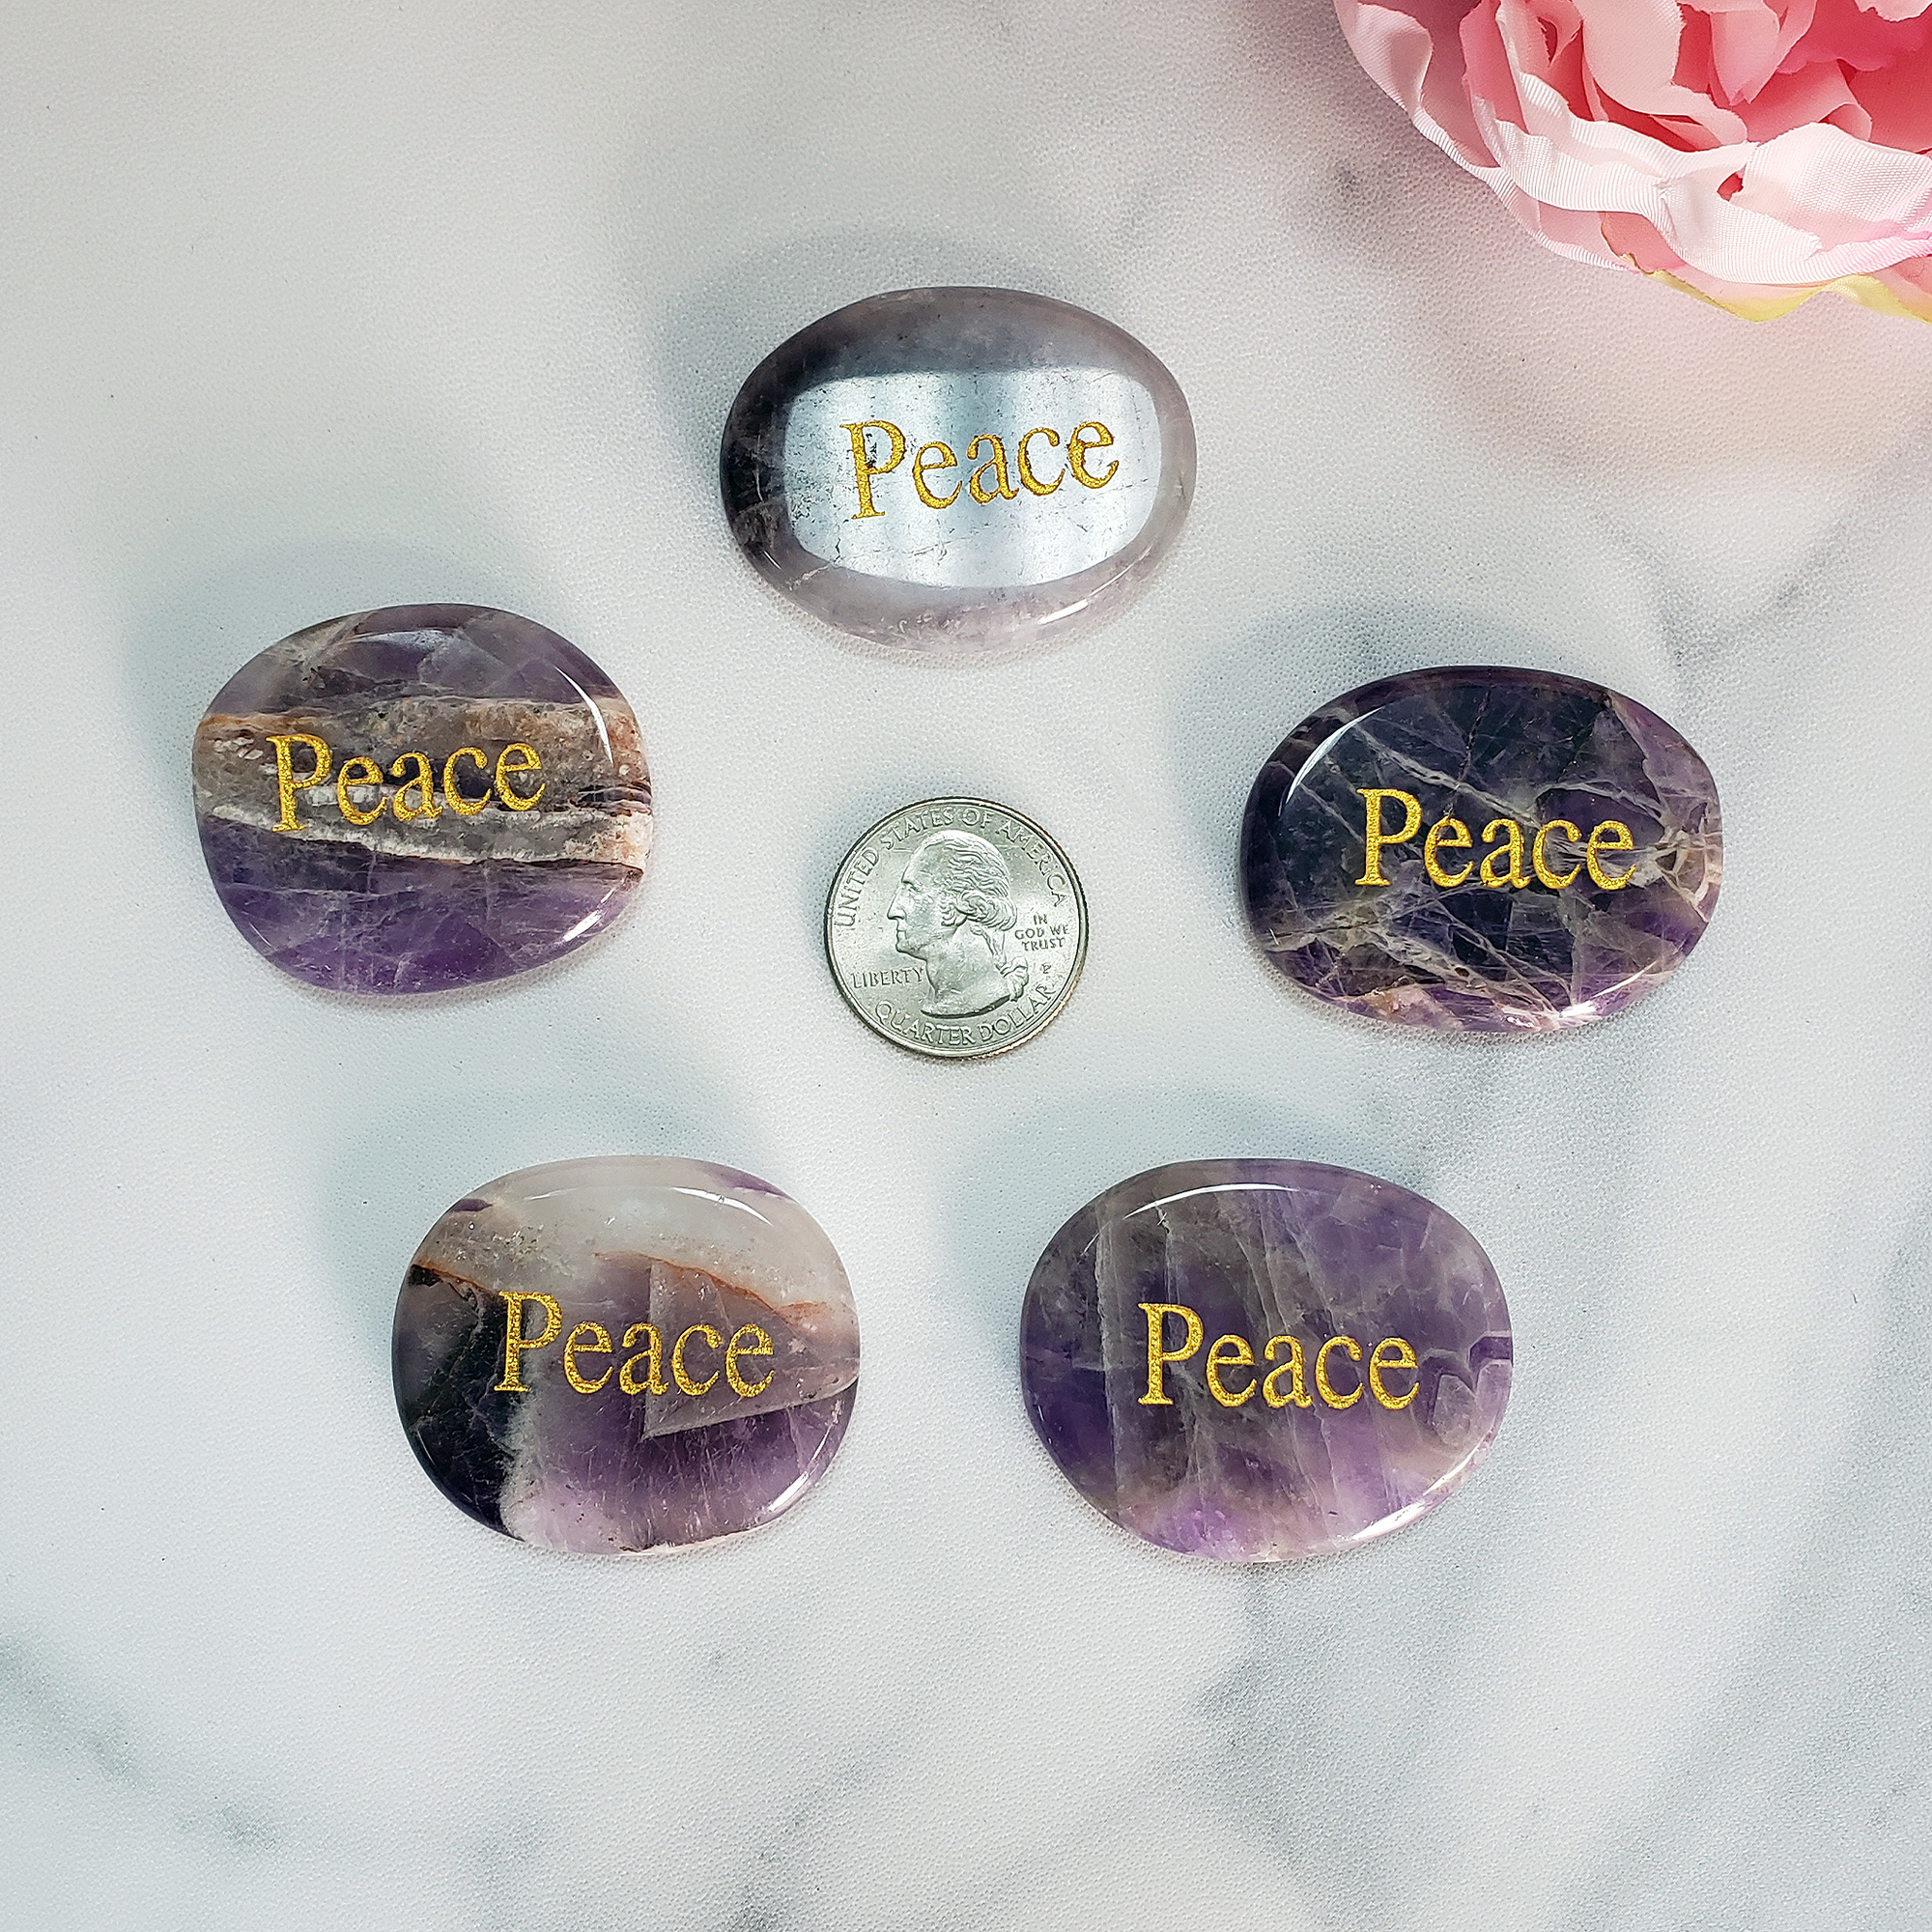 Amethyst Peace Affirmation Palm Stone | Natural Crystal Worry Stone with "Peace" Engraving - Size Comparison